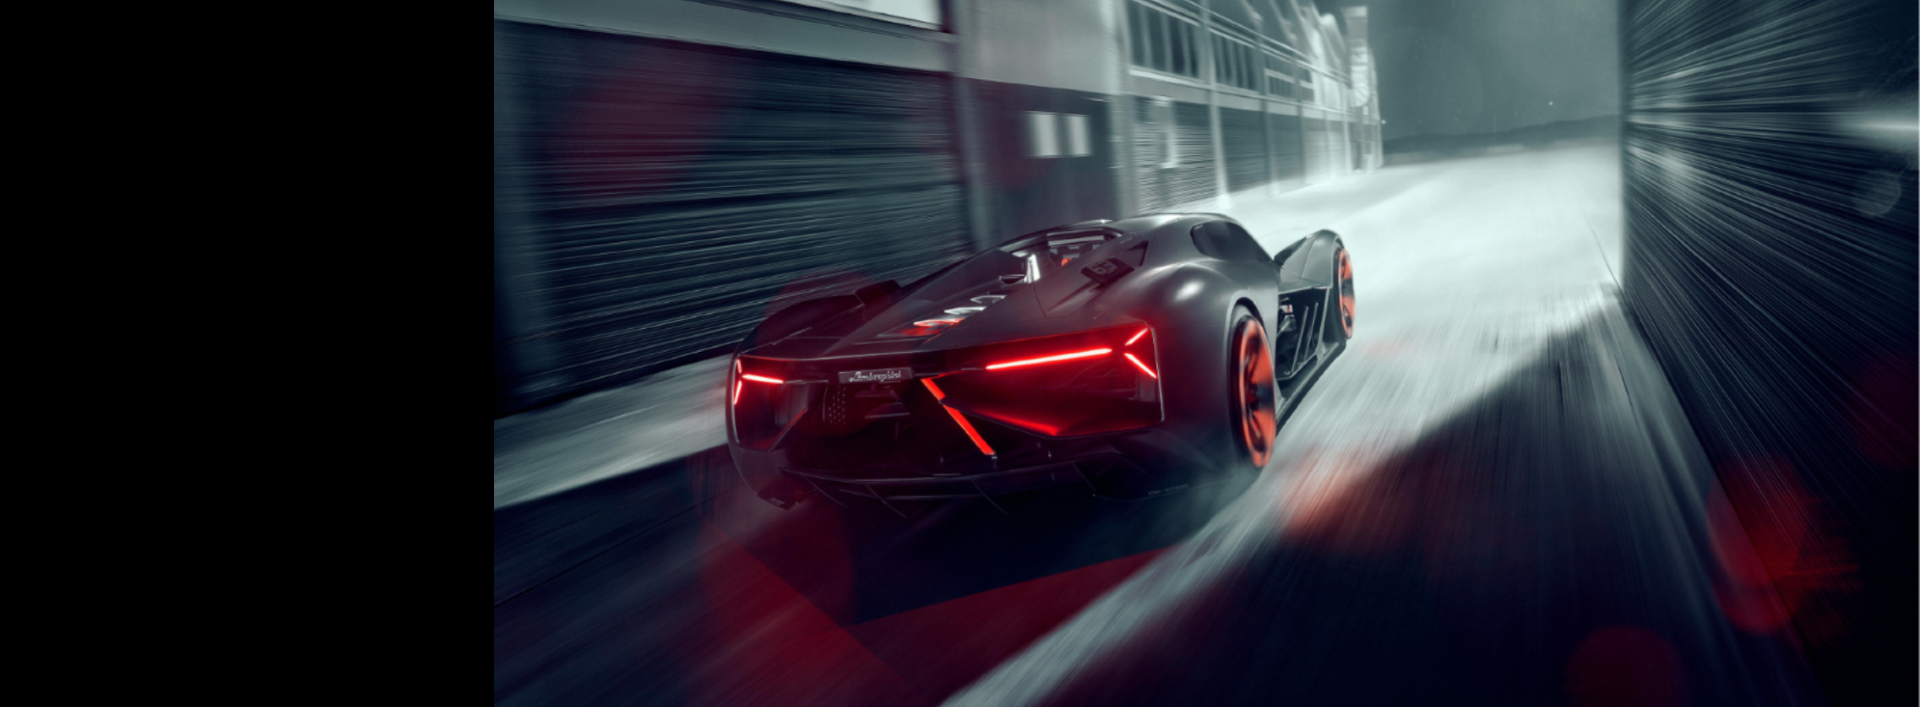 Lamborghini Terzo Millennio Is The Meanest Thing We've Ever Seen